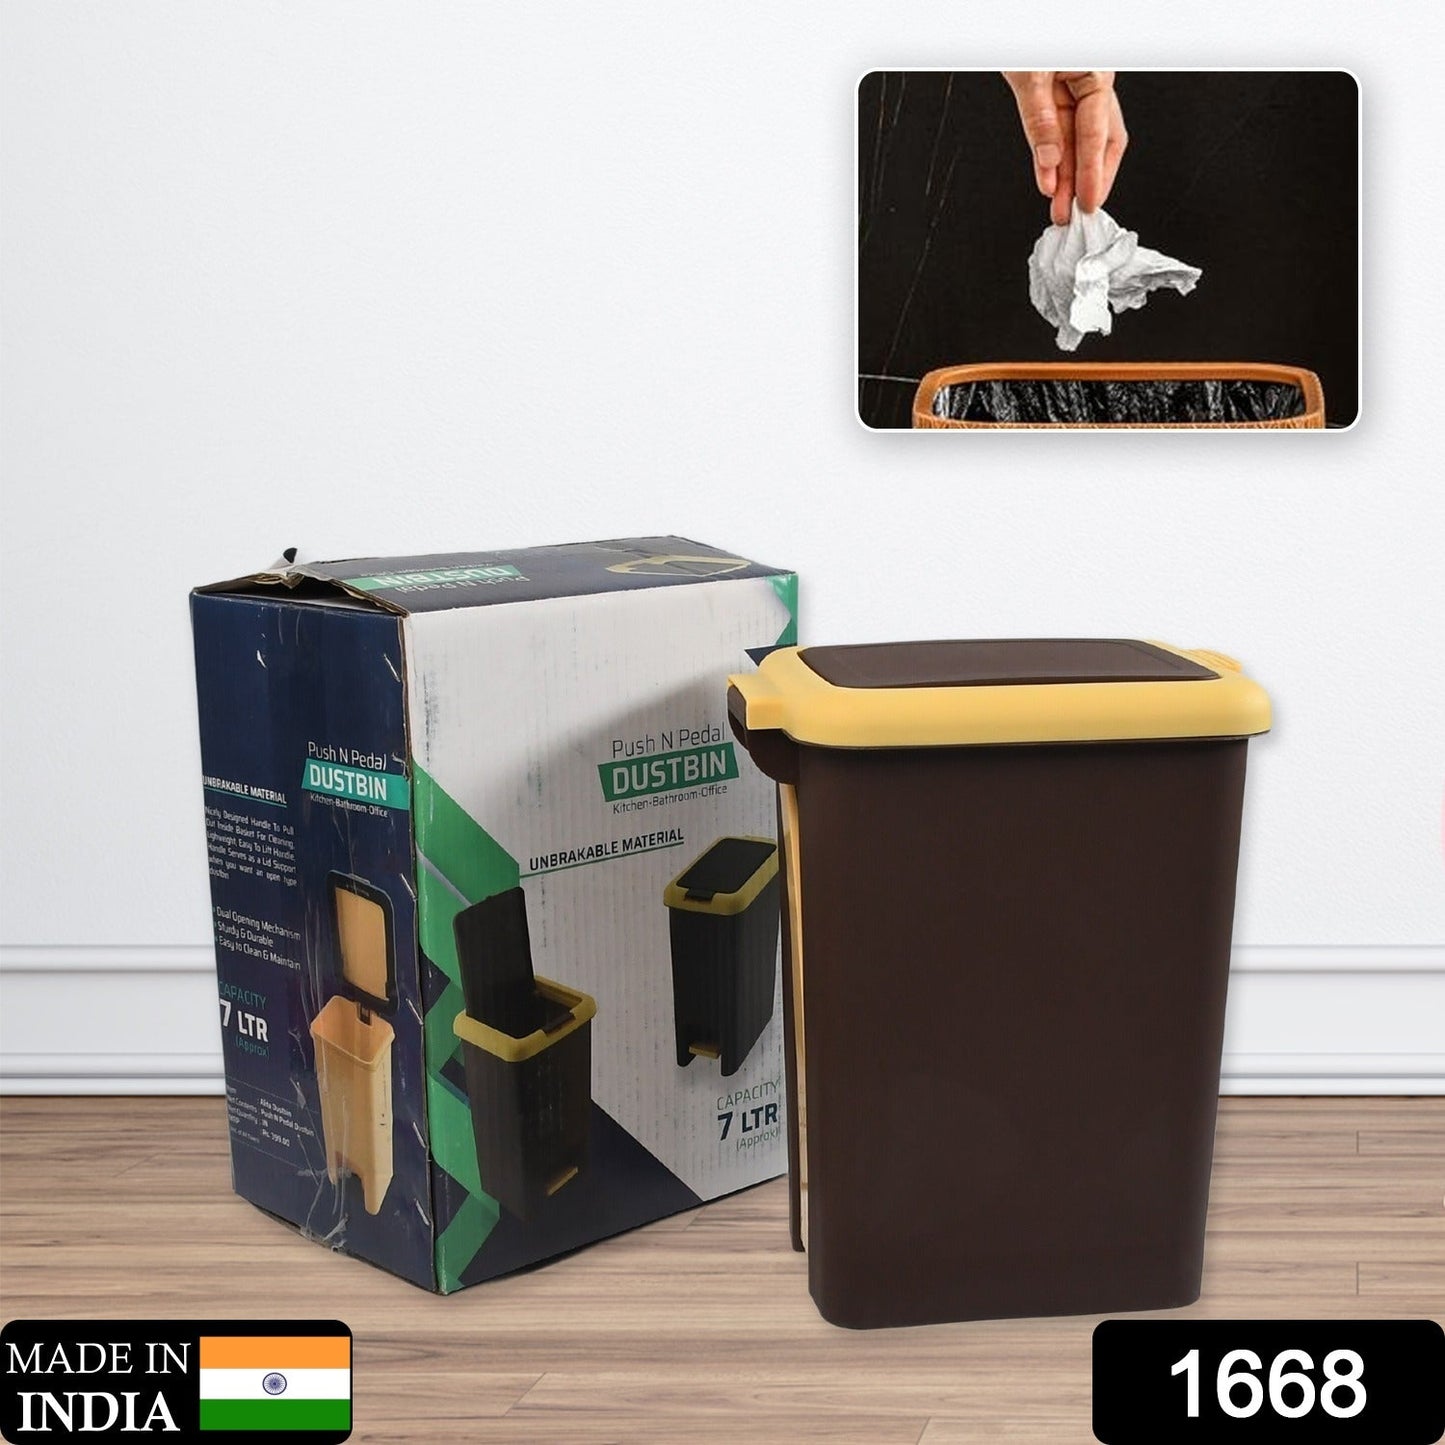 1668 Plastic Push N Pedal Dustbin Plastic Kitchen Waste Bin with Lid | Trash Can Waste Basket for Bathroom, Hands Free with Step On Foot Pedal and Garbage Bag Ring ( 7 Ltr. ) 